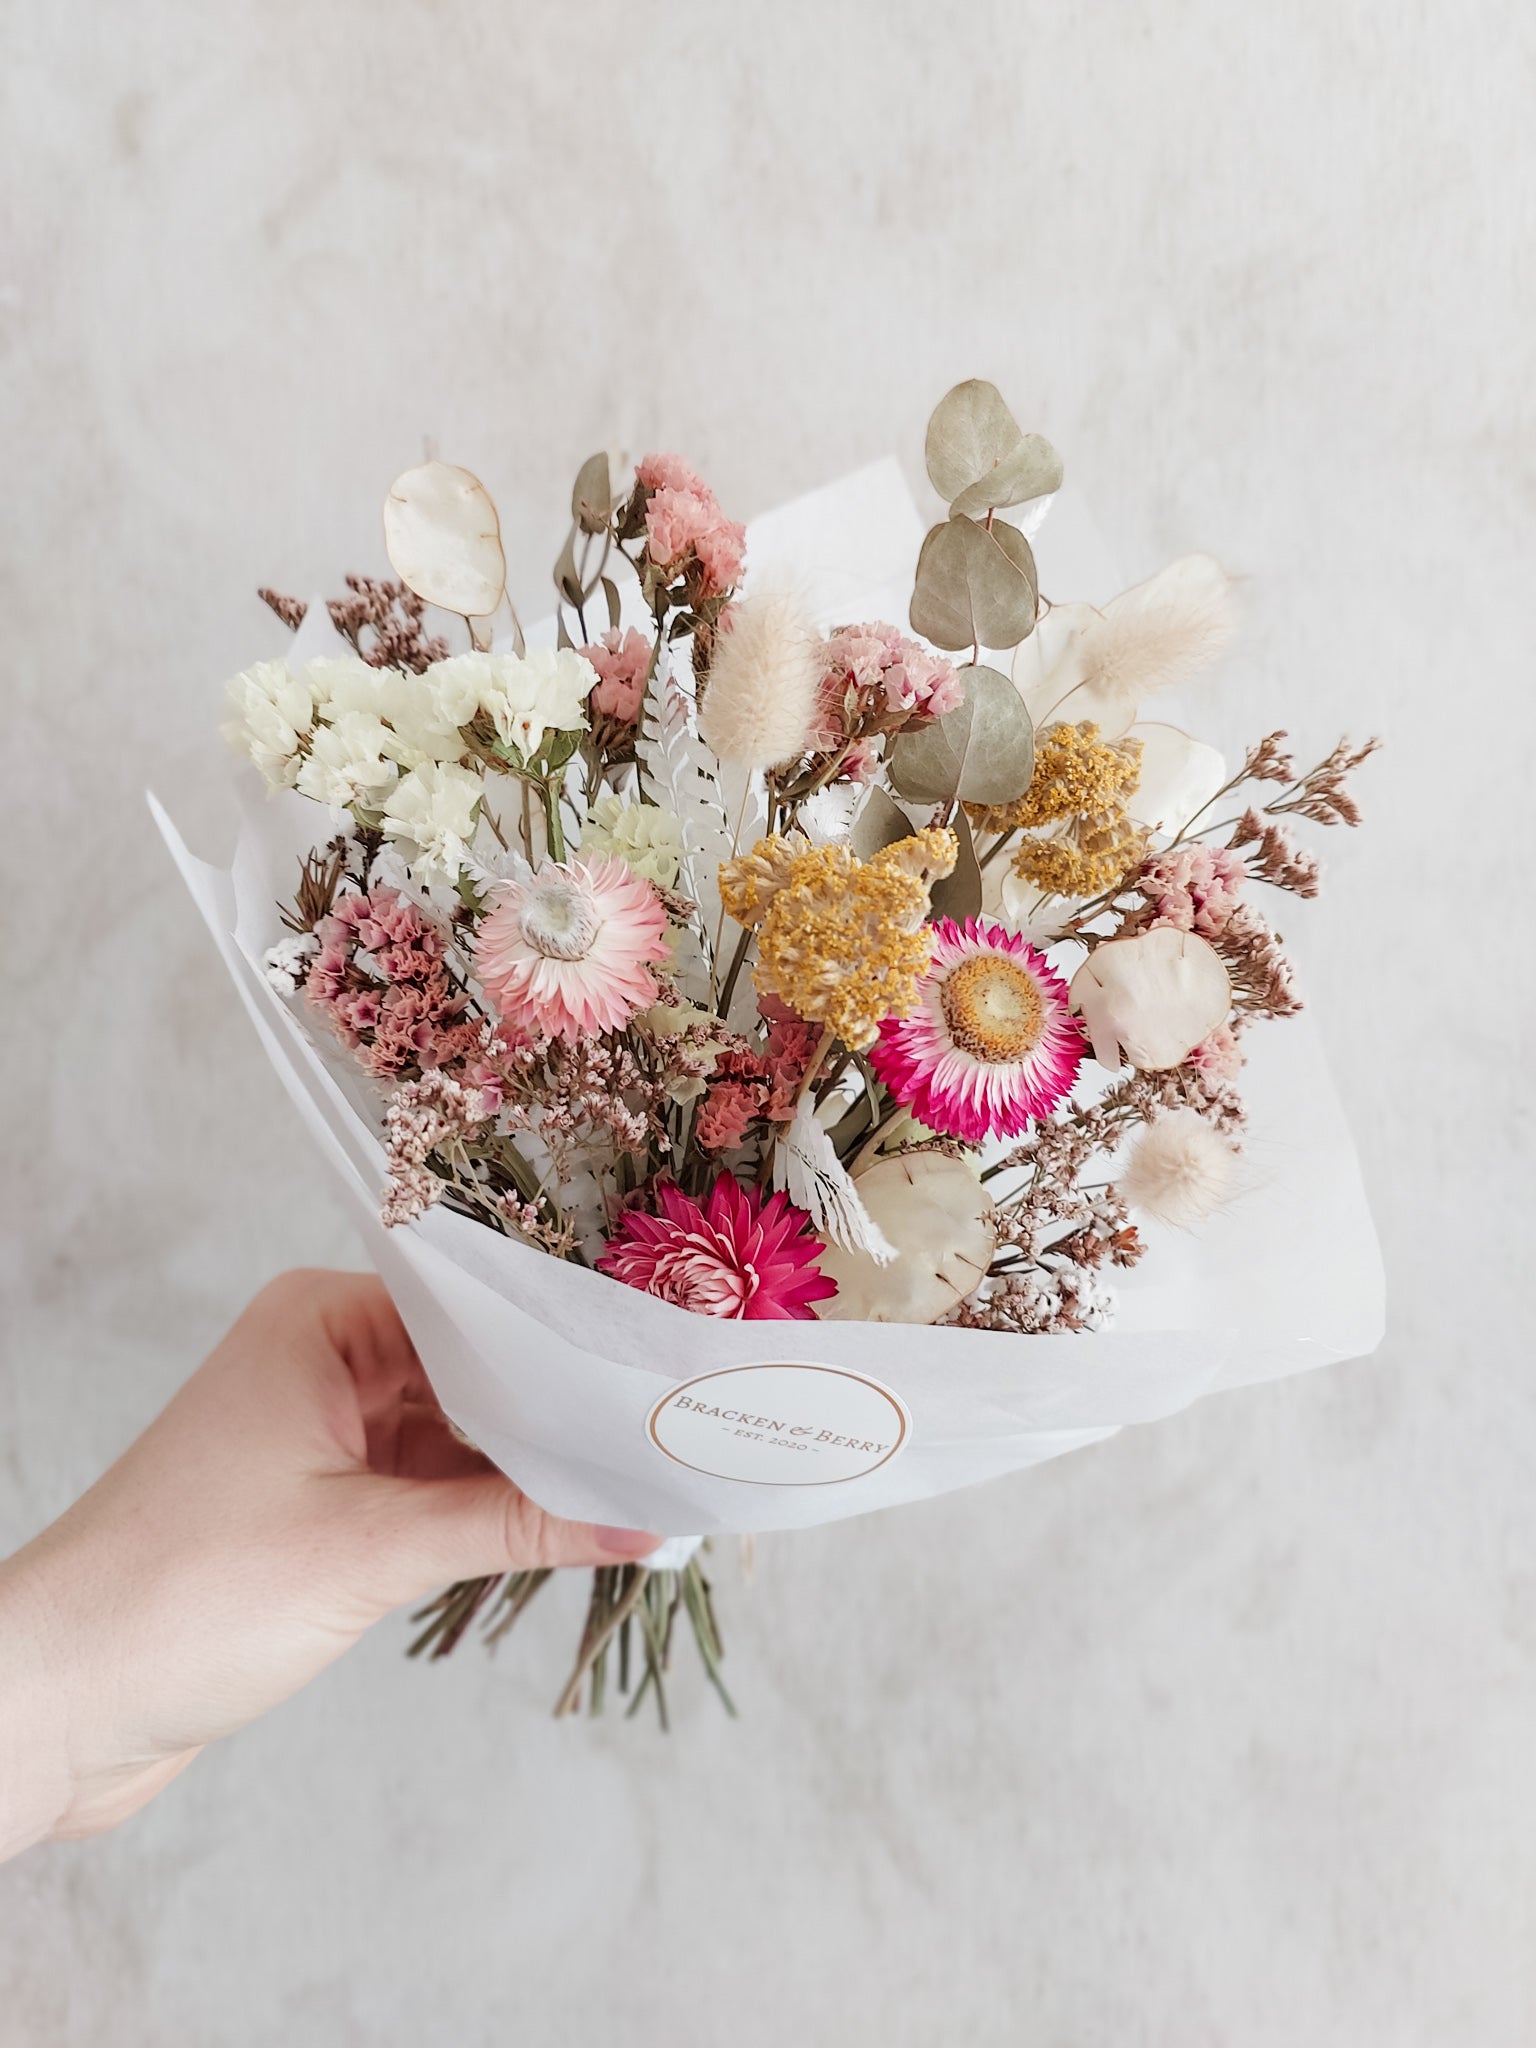 Dried flower posy wrapped in tissue paper - soft feminine tones.